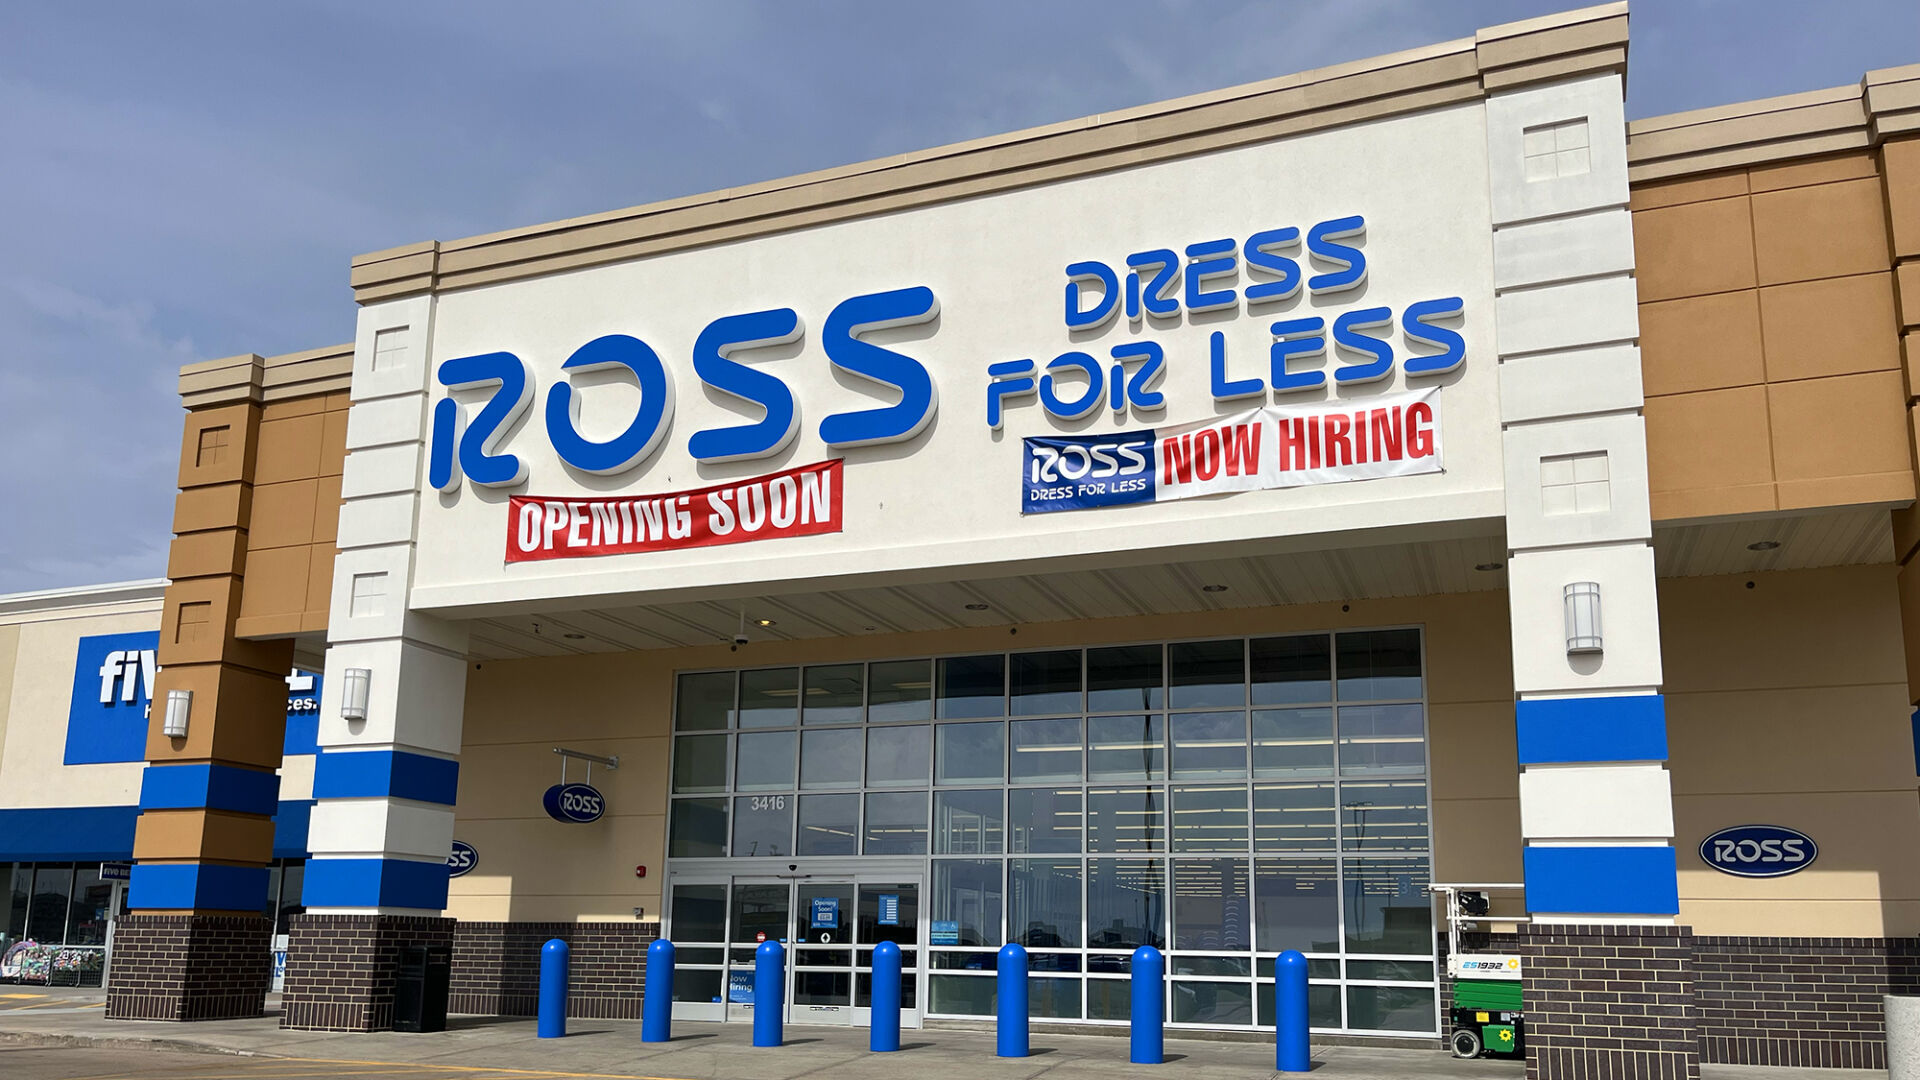 Ross Dress For Less® to help local kids learn in Mobile and Baldwin  Counties - Boys & Girls Clubs of South Alabama